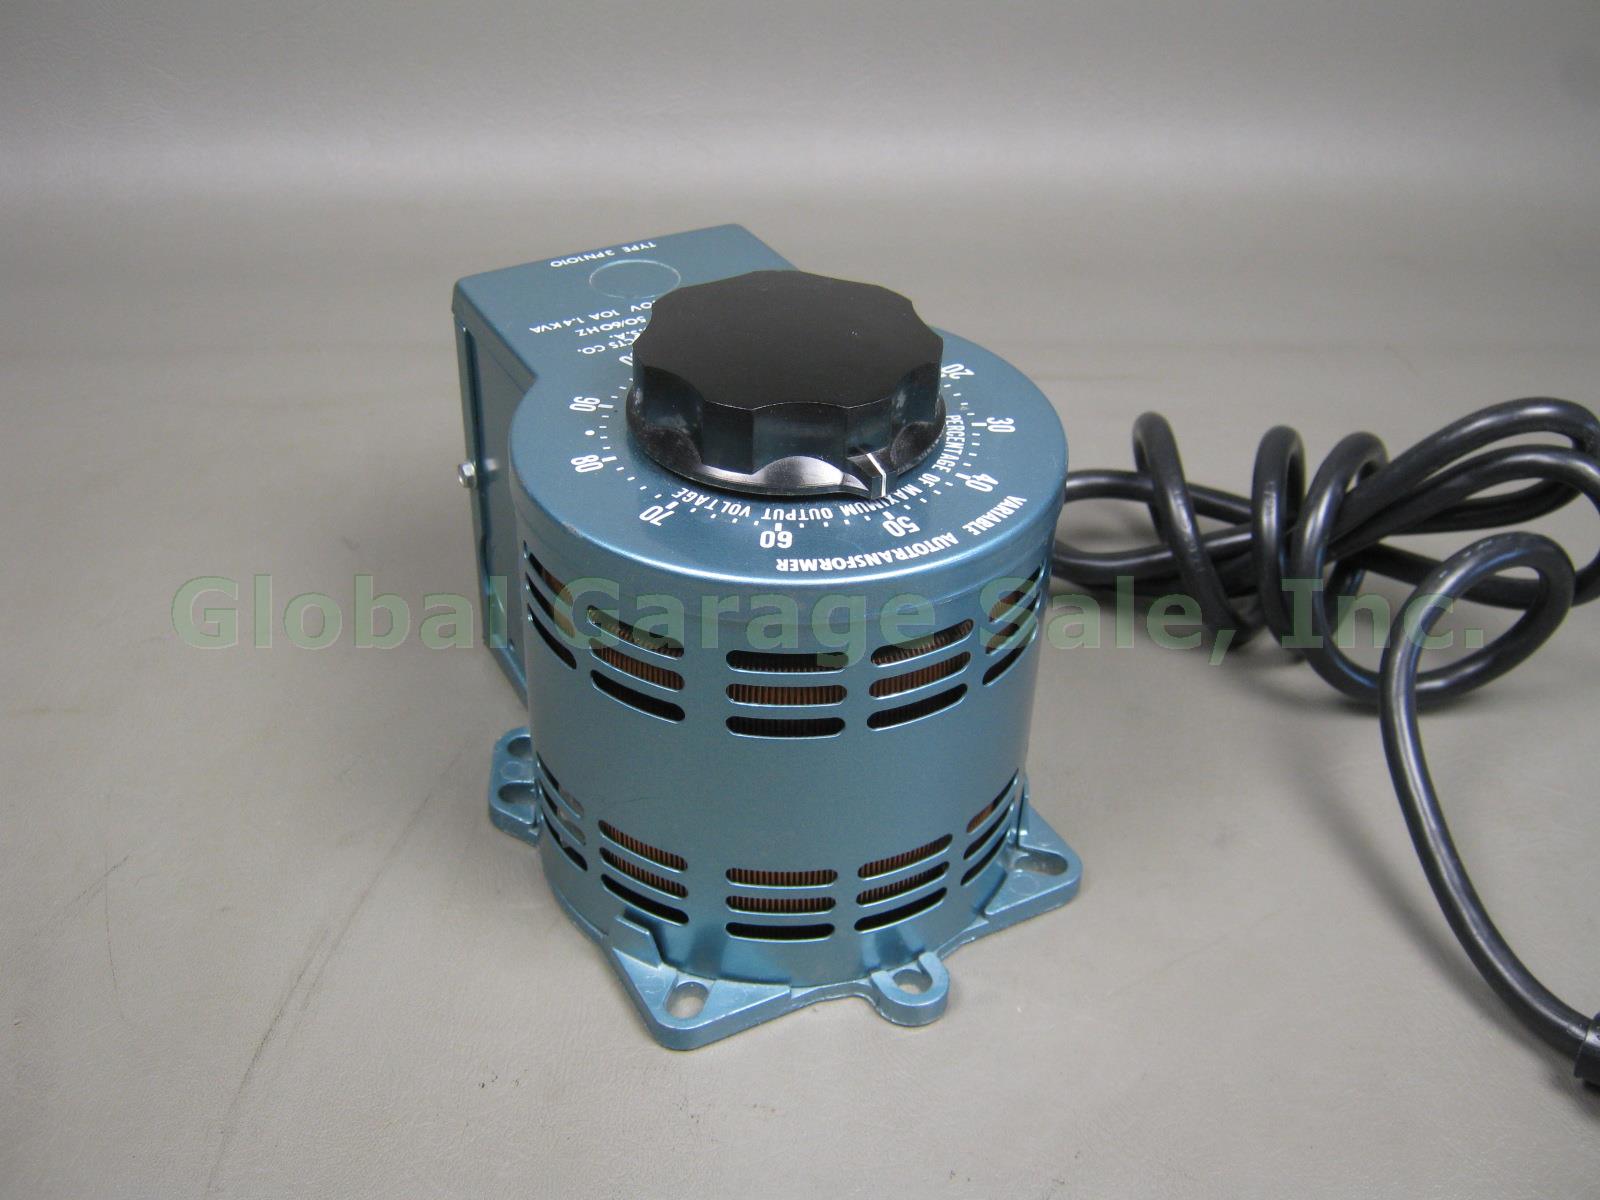 Staco Energy Products Co Variable Autotransformer Model Type 3PN1010 120V 50/60 2